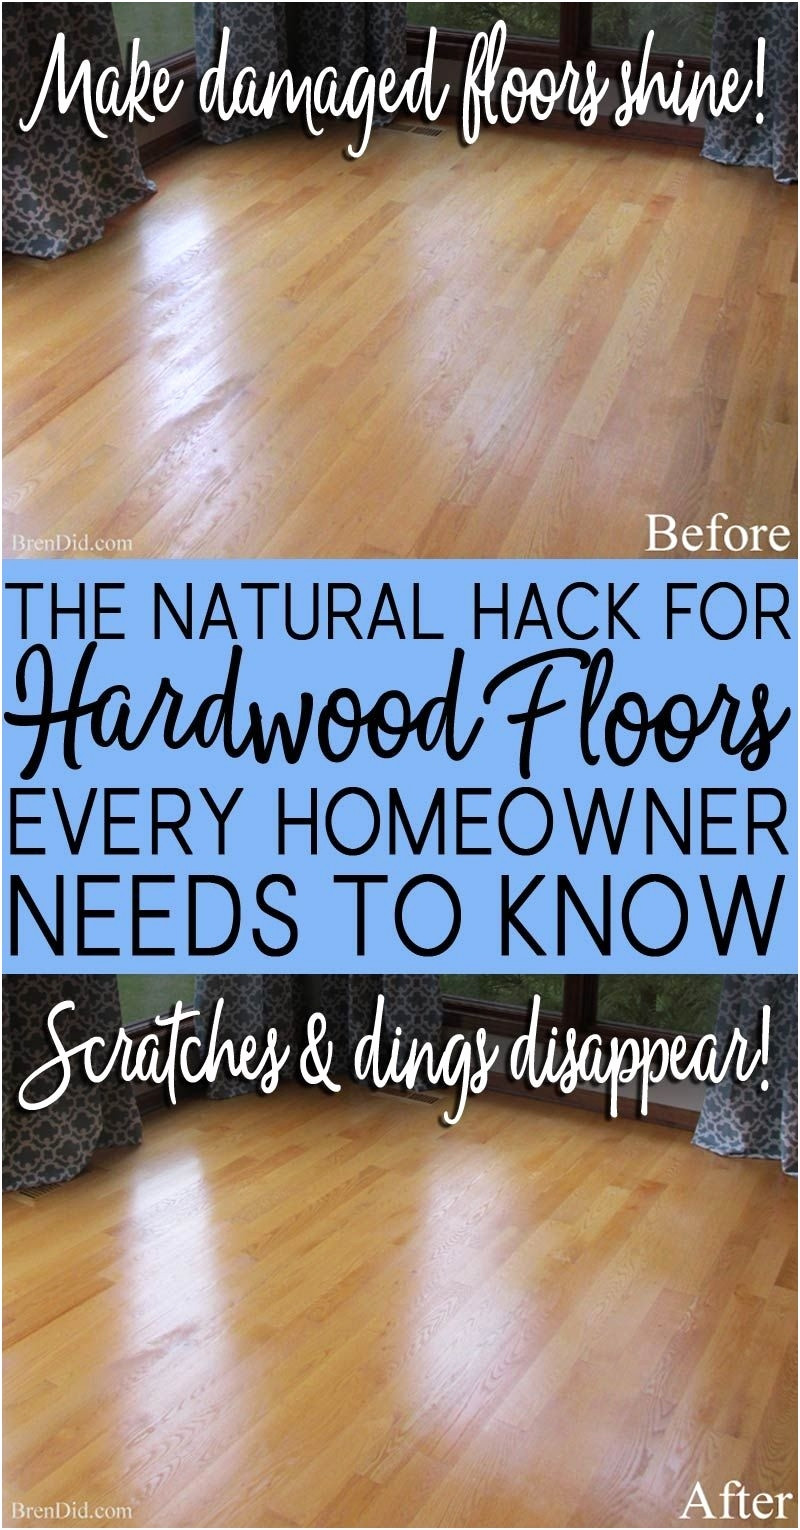 18 attractive Pictures Of Hardwood Floors 2024 free download pictures of hardwood floors of hardwood flooring dogs new what is the best flooring for dogs new regarding hardwood flooring dogs new what is the best flooring for dogs new tinygreencabins 0